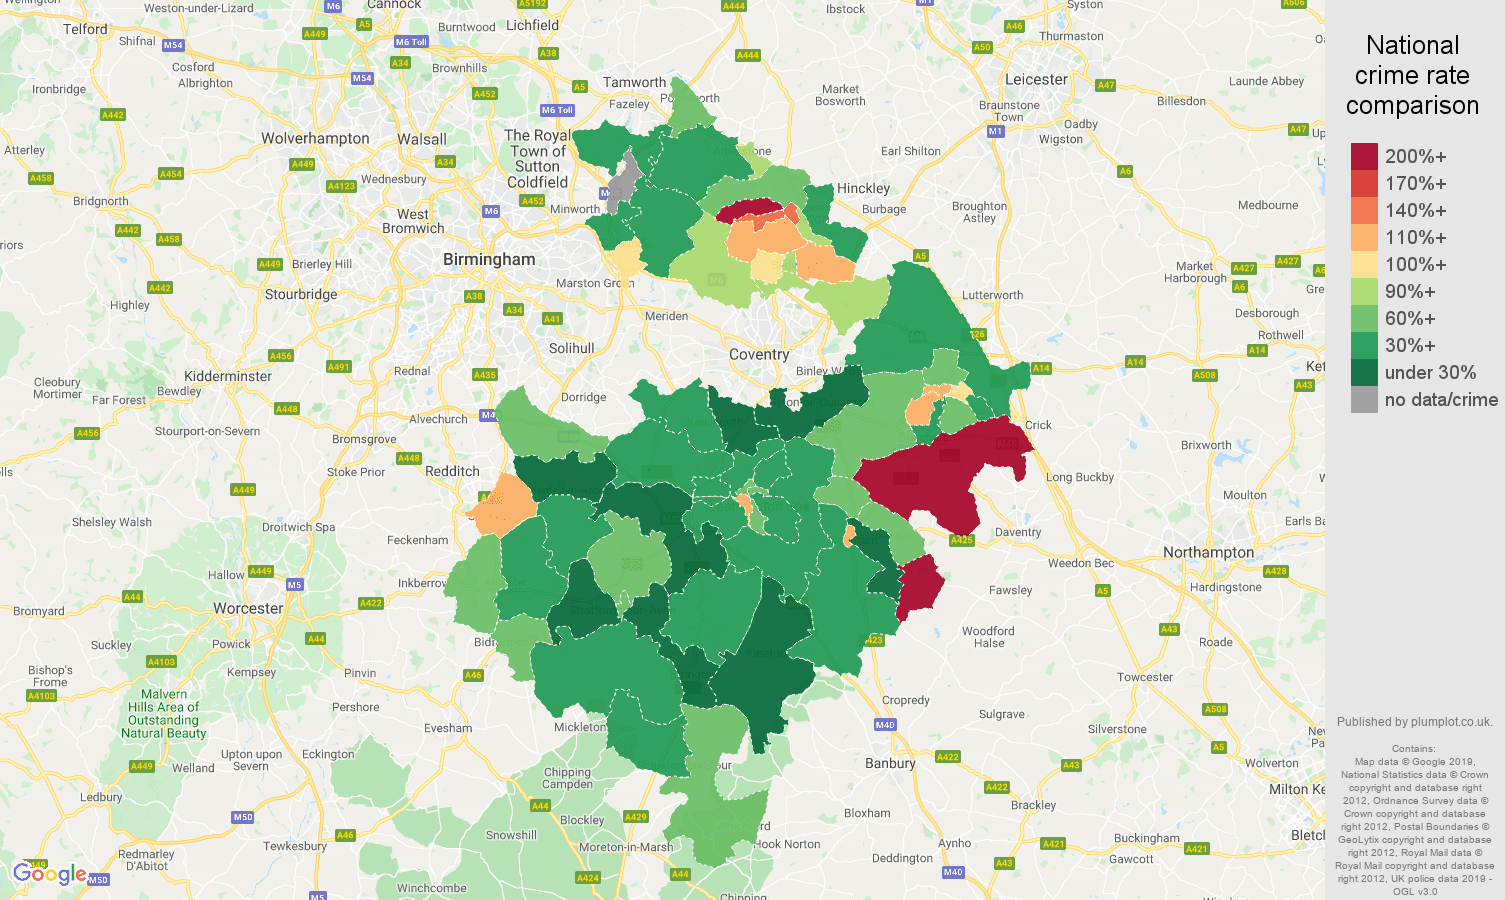 Warwickshire other crime rate comparison map